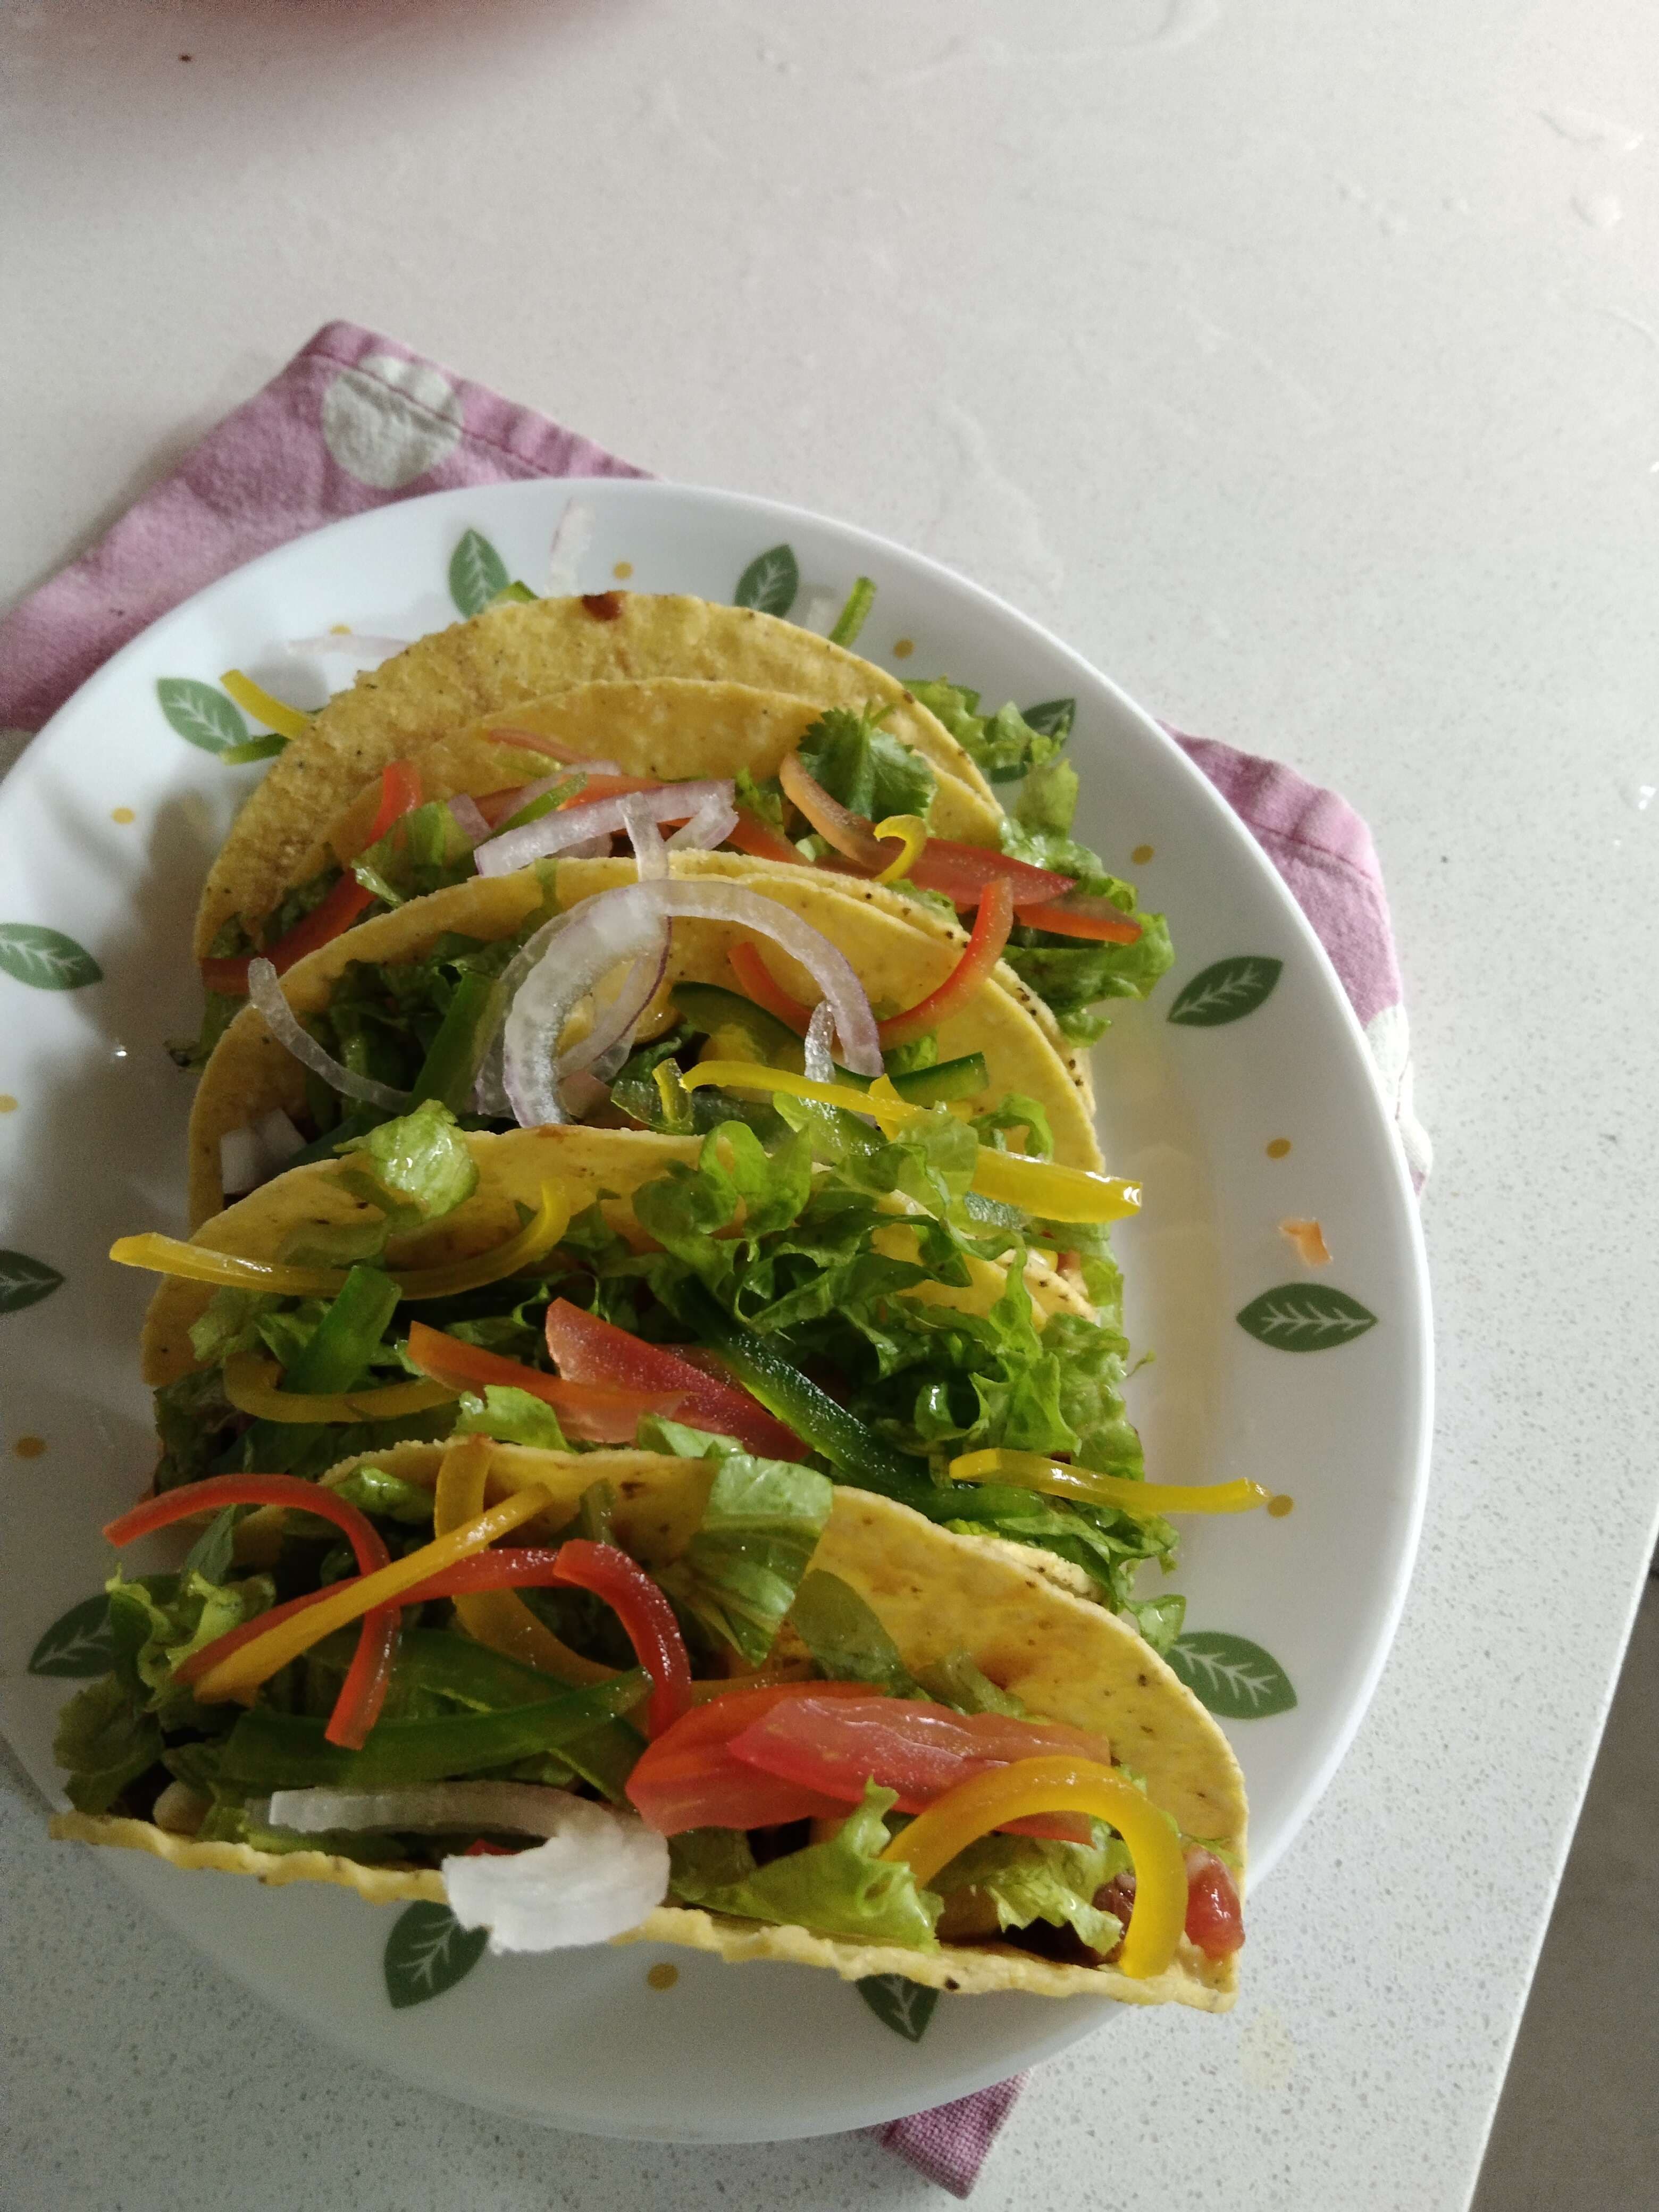 Delicious Veg Taco prepared by COOX